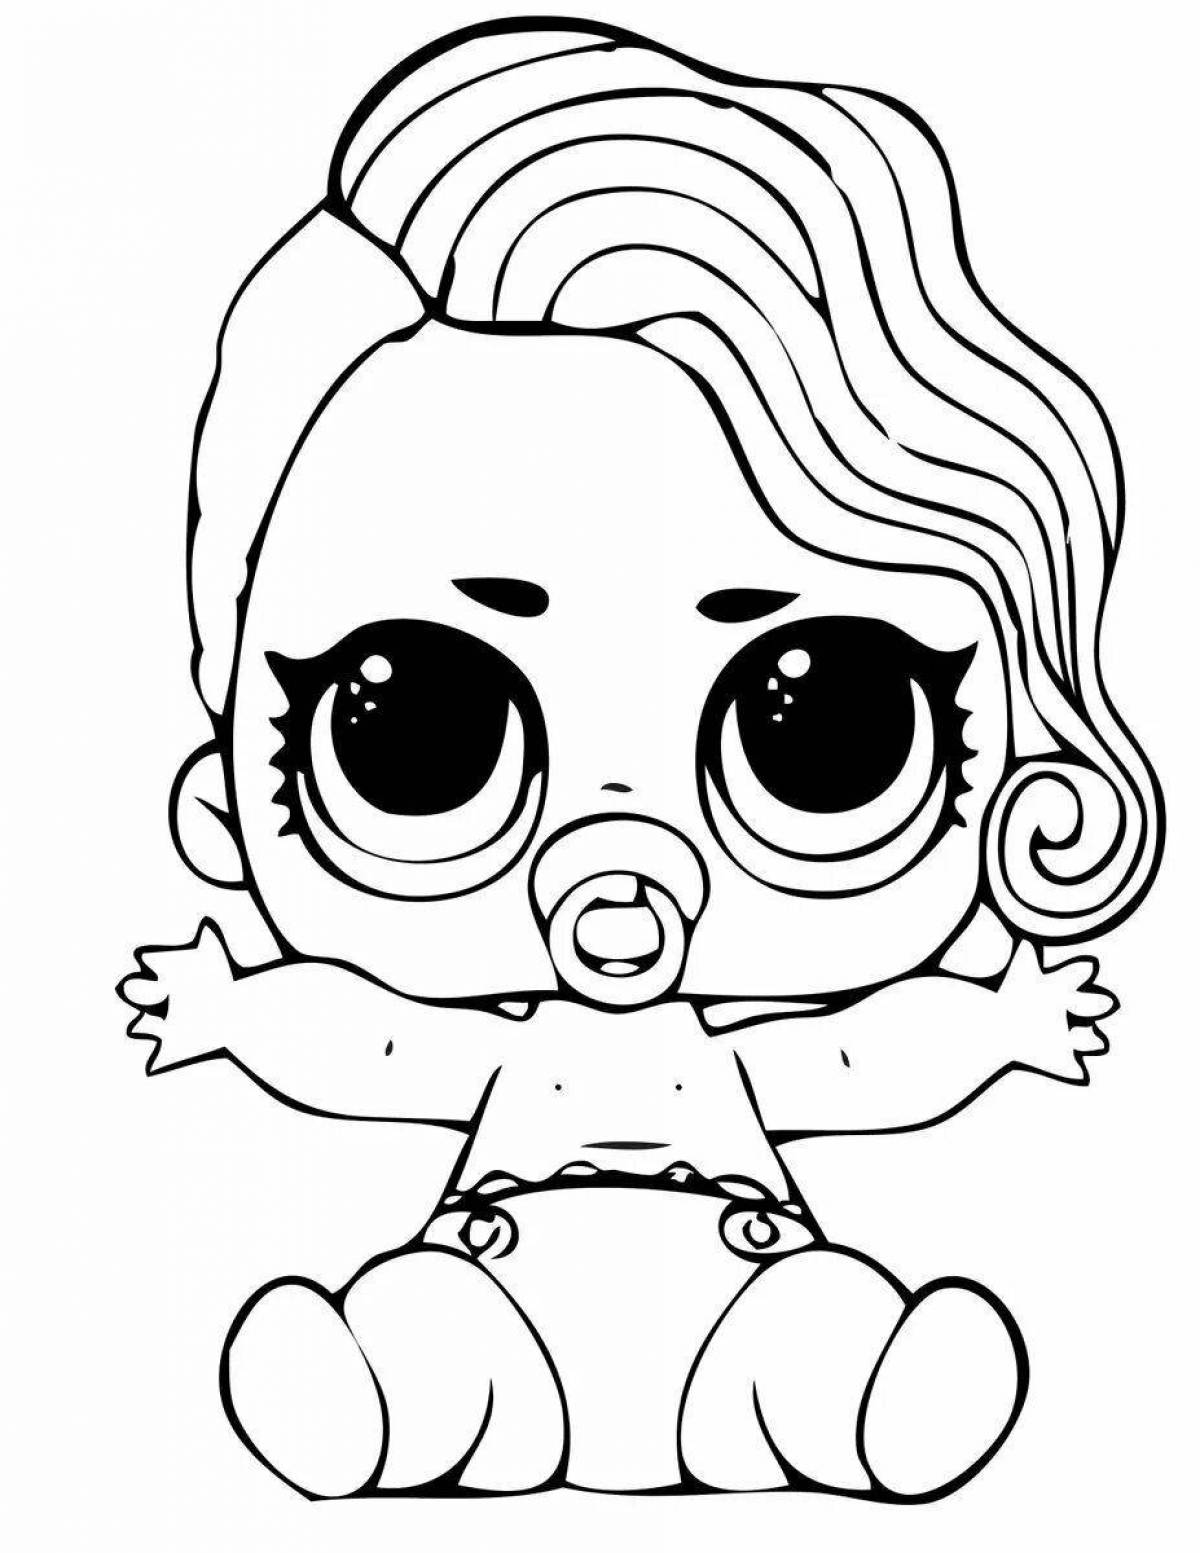 Low doll colorful coloring page